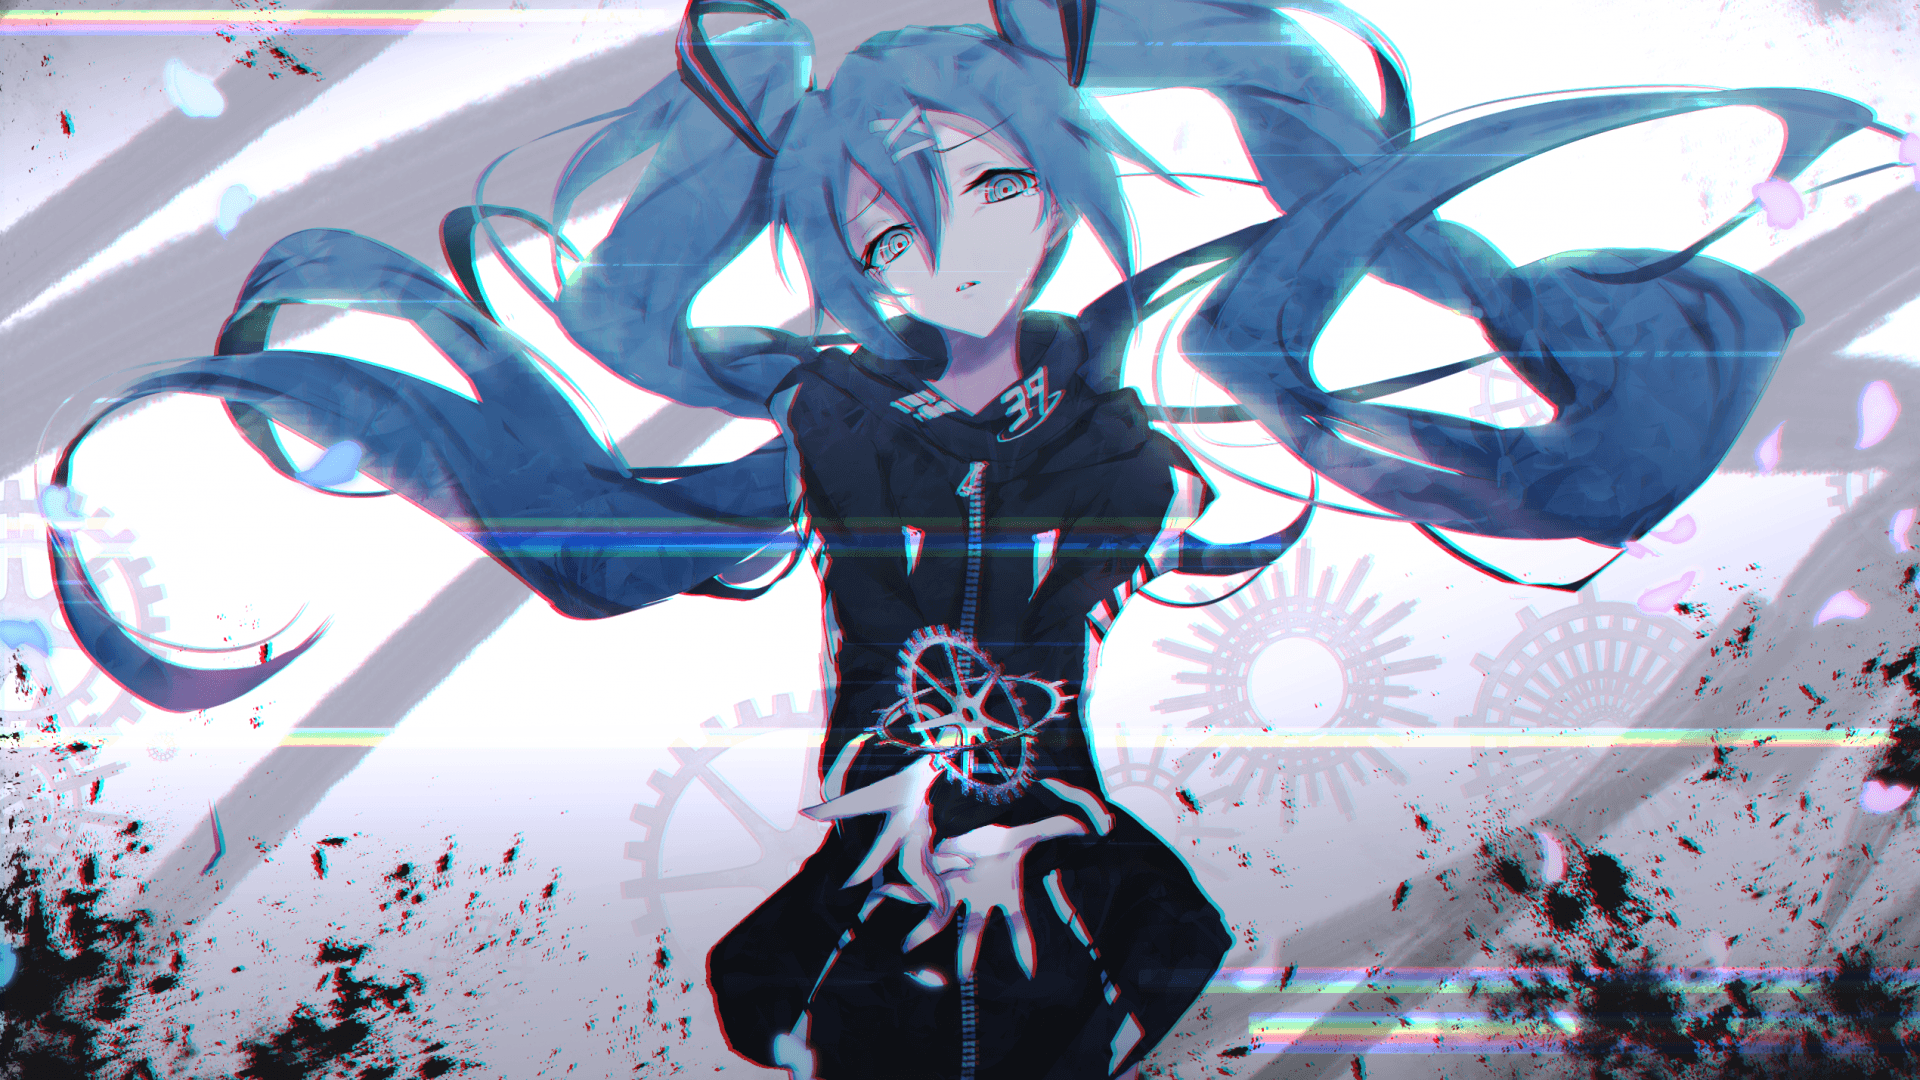 Download 1920x1080 Vocaloid, Twintails, Hatsune Miku Wallpapers for